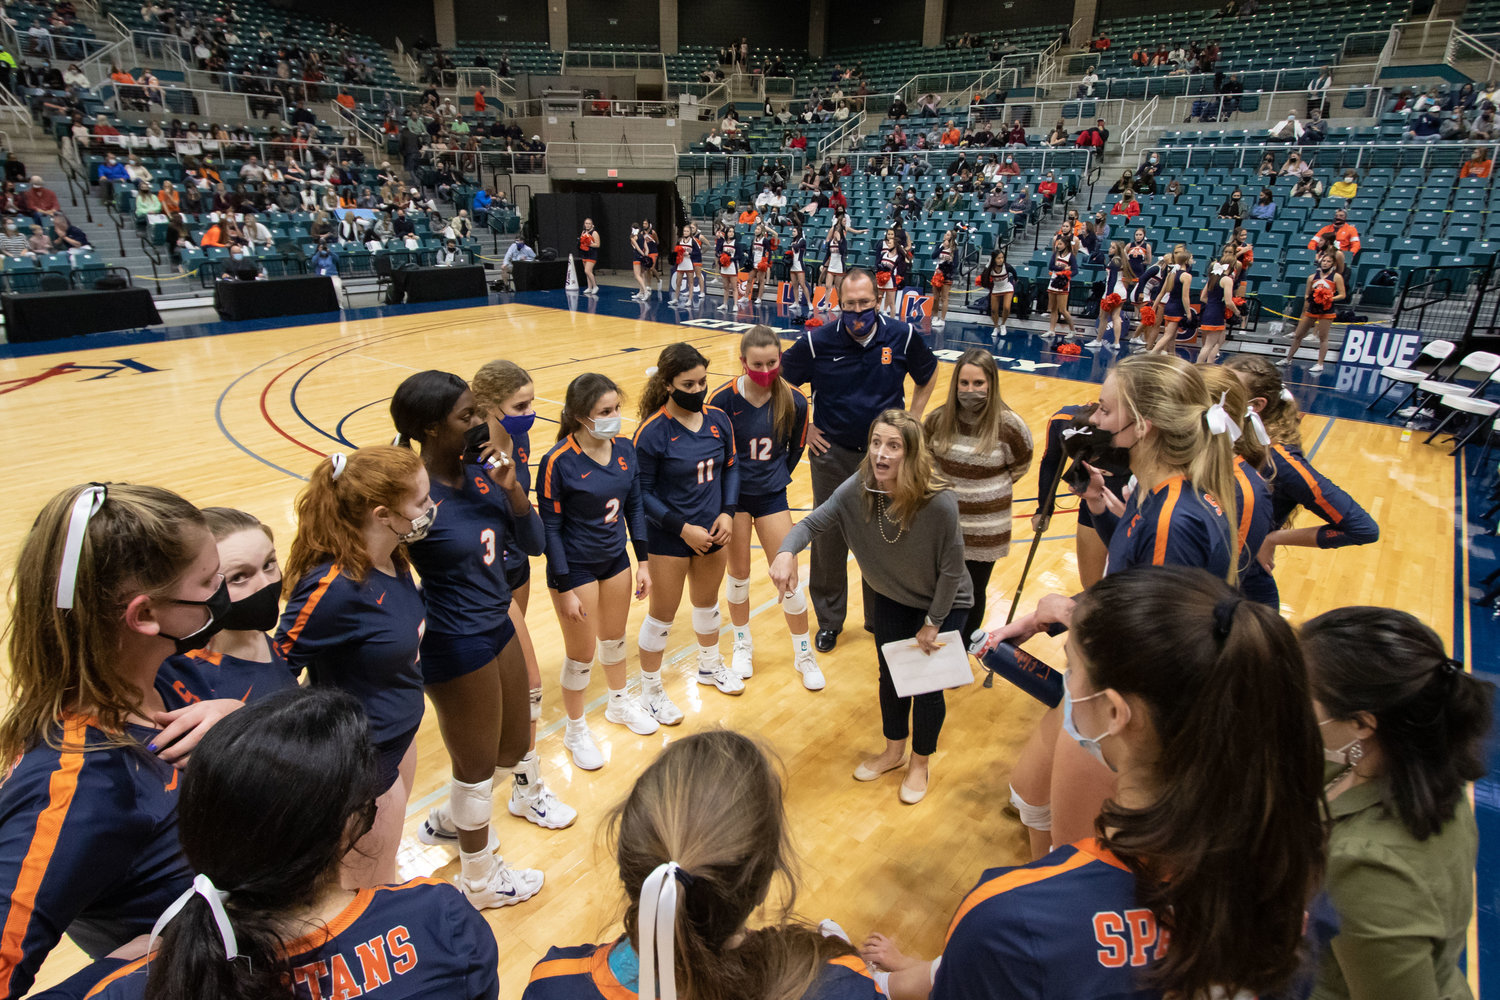 Seven Lakes volleyball coach Amy Cataline talks with her team during their Class 6A state semifinal match against San Antonio Reagan on Dec. 7, 2020 at the Merrell Center. The team went on to take home the state championship after a lot of hard work and determination that players say was inspired by Cataline.